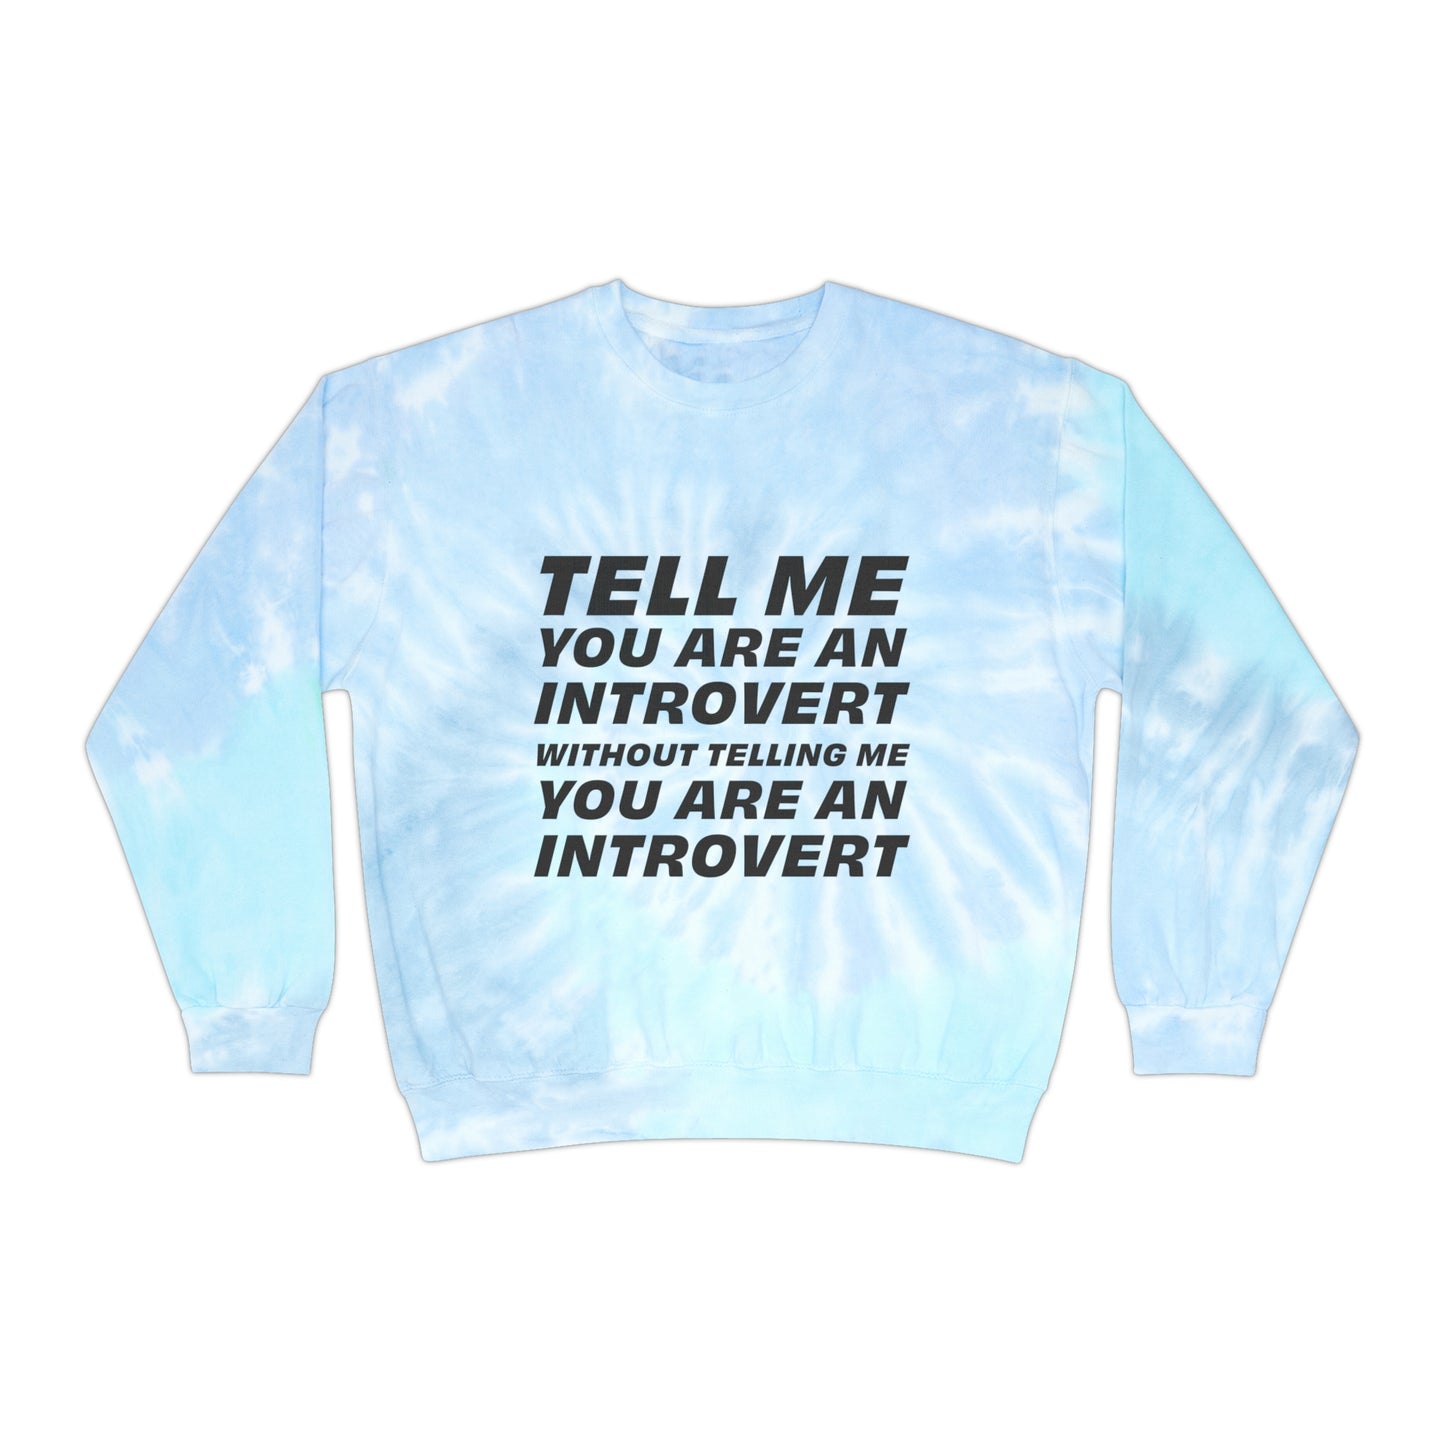 Tell Me You Are An Introvert Without Telling Me... Sweatshirt